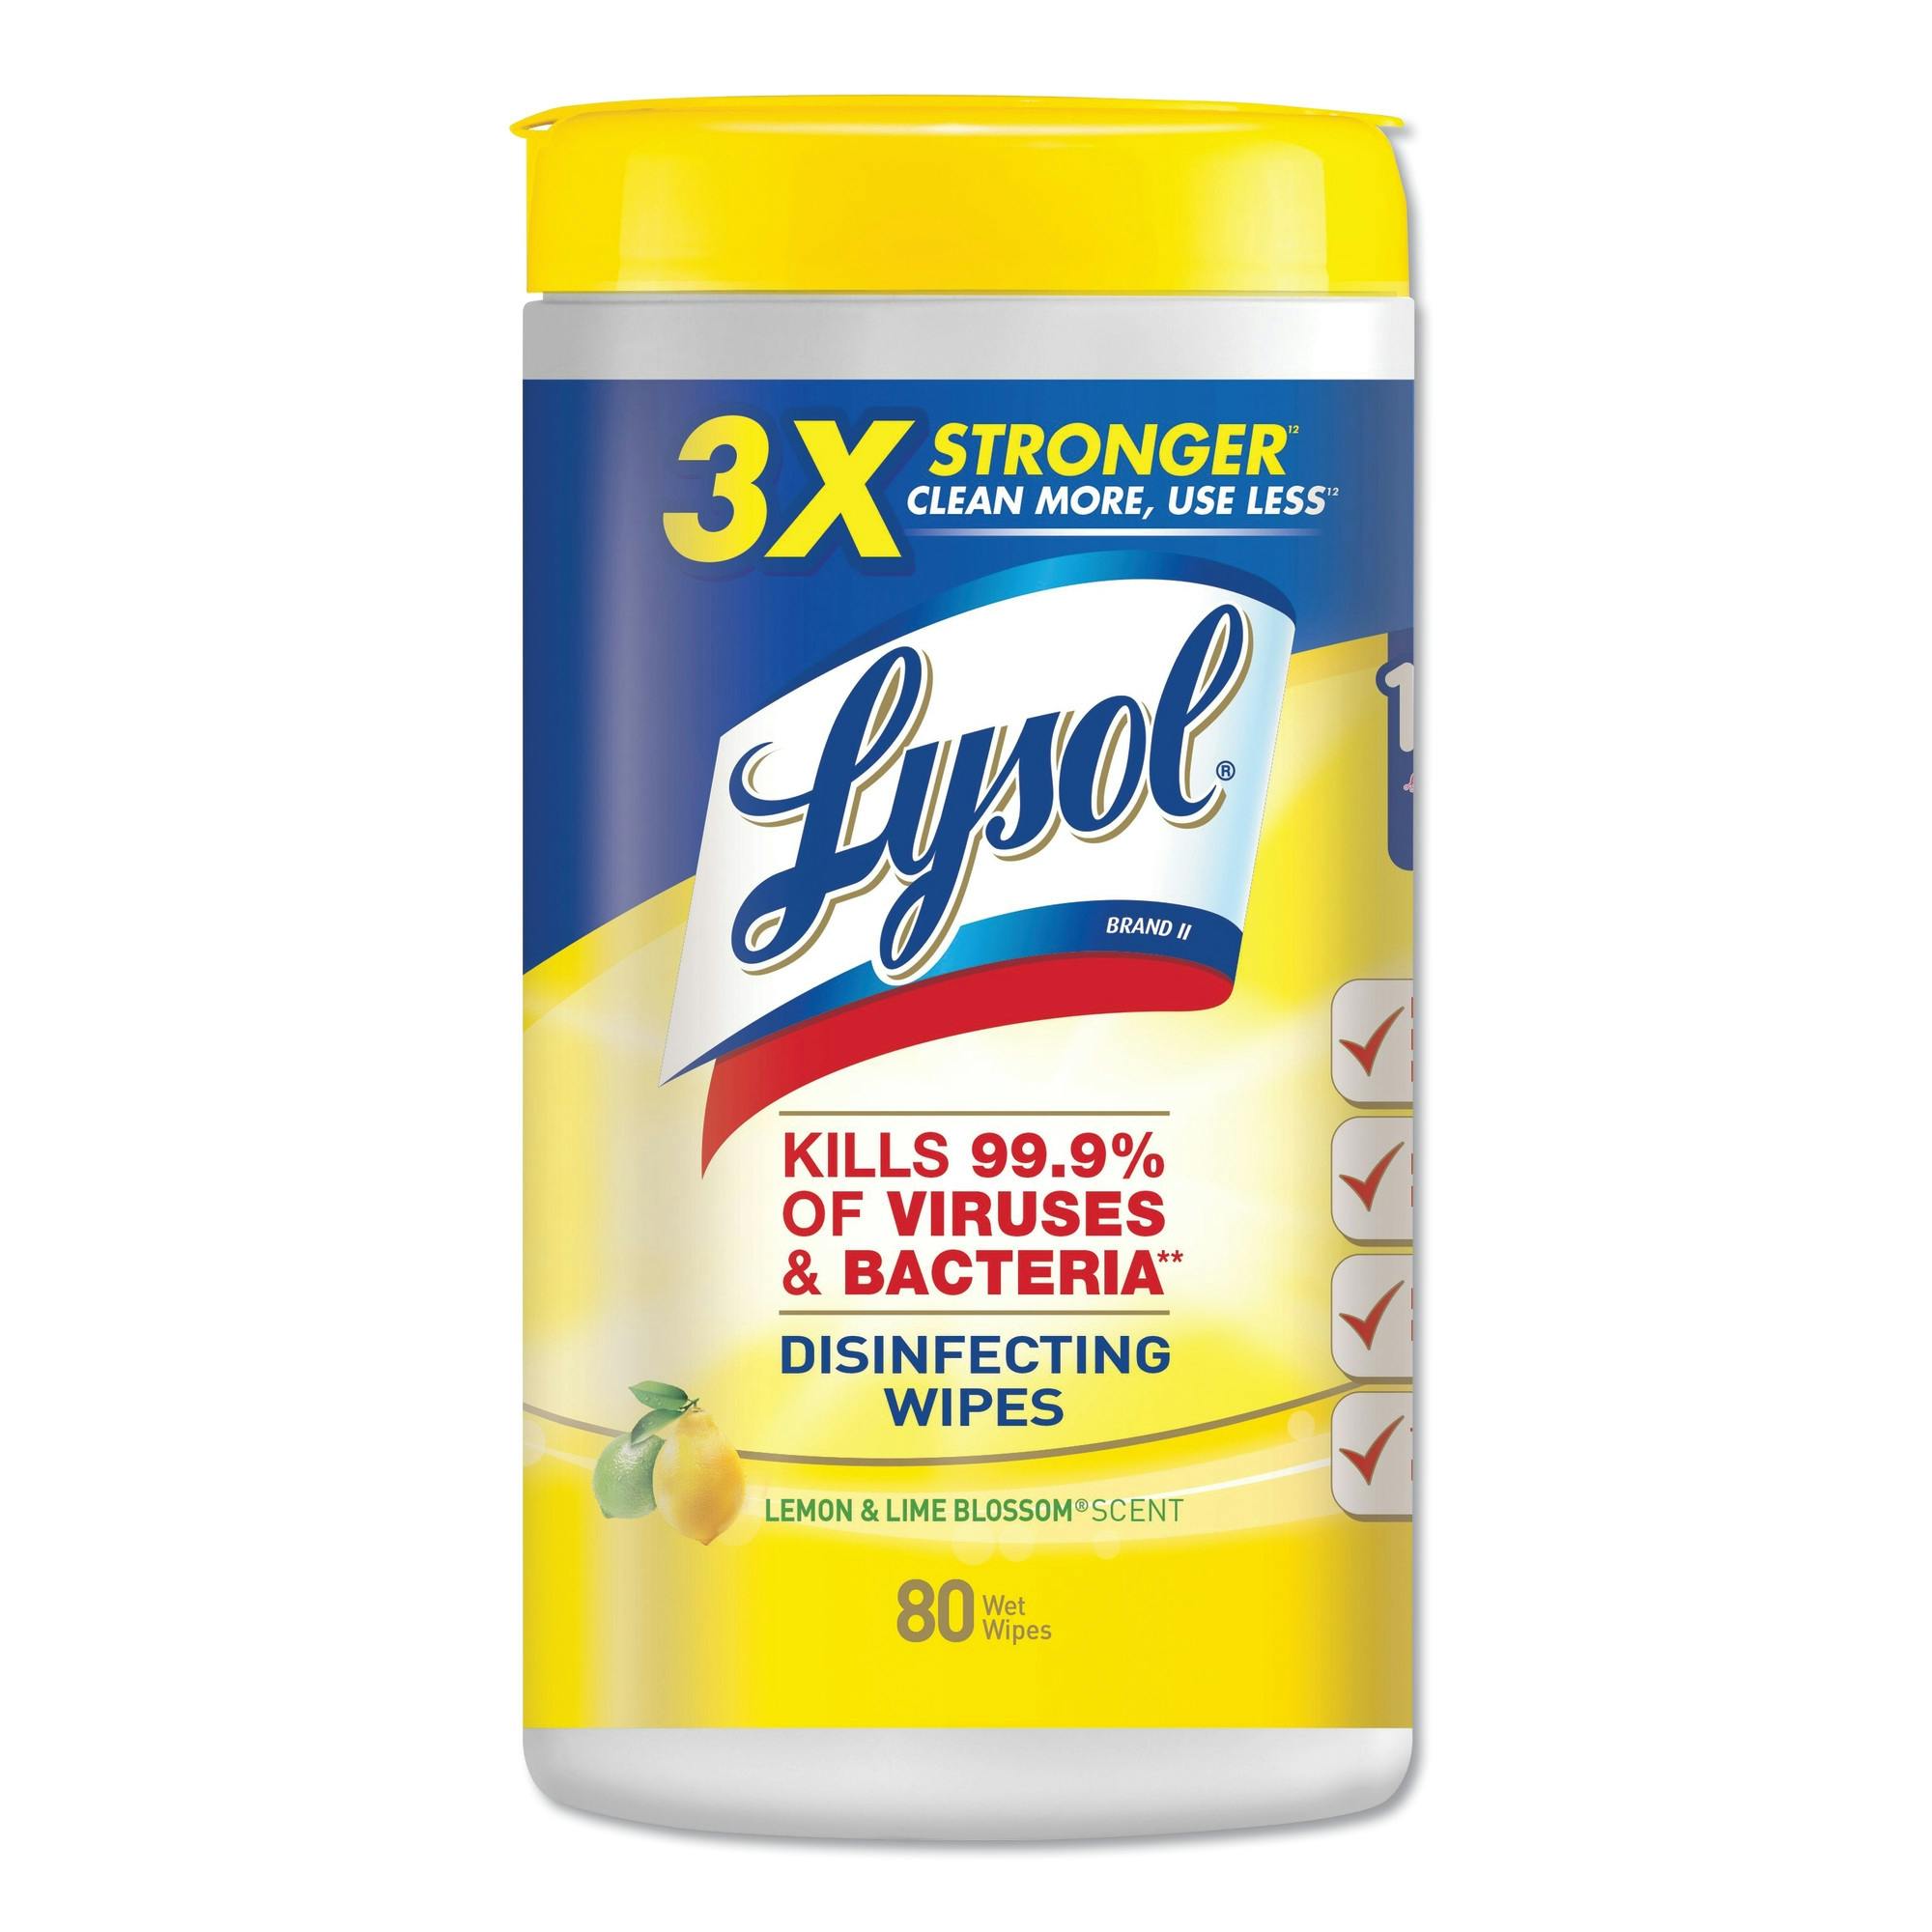 Lysol Surface Disinfectant Cleaner Premoistened Alcohol Based Wipe, Lemon Lime Blossom Scent, Canister, RAC77182CT, 1 Canister